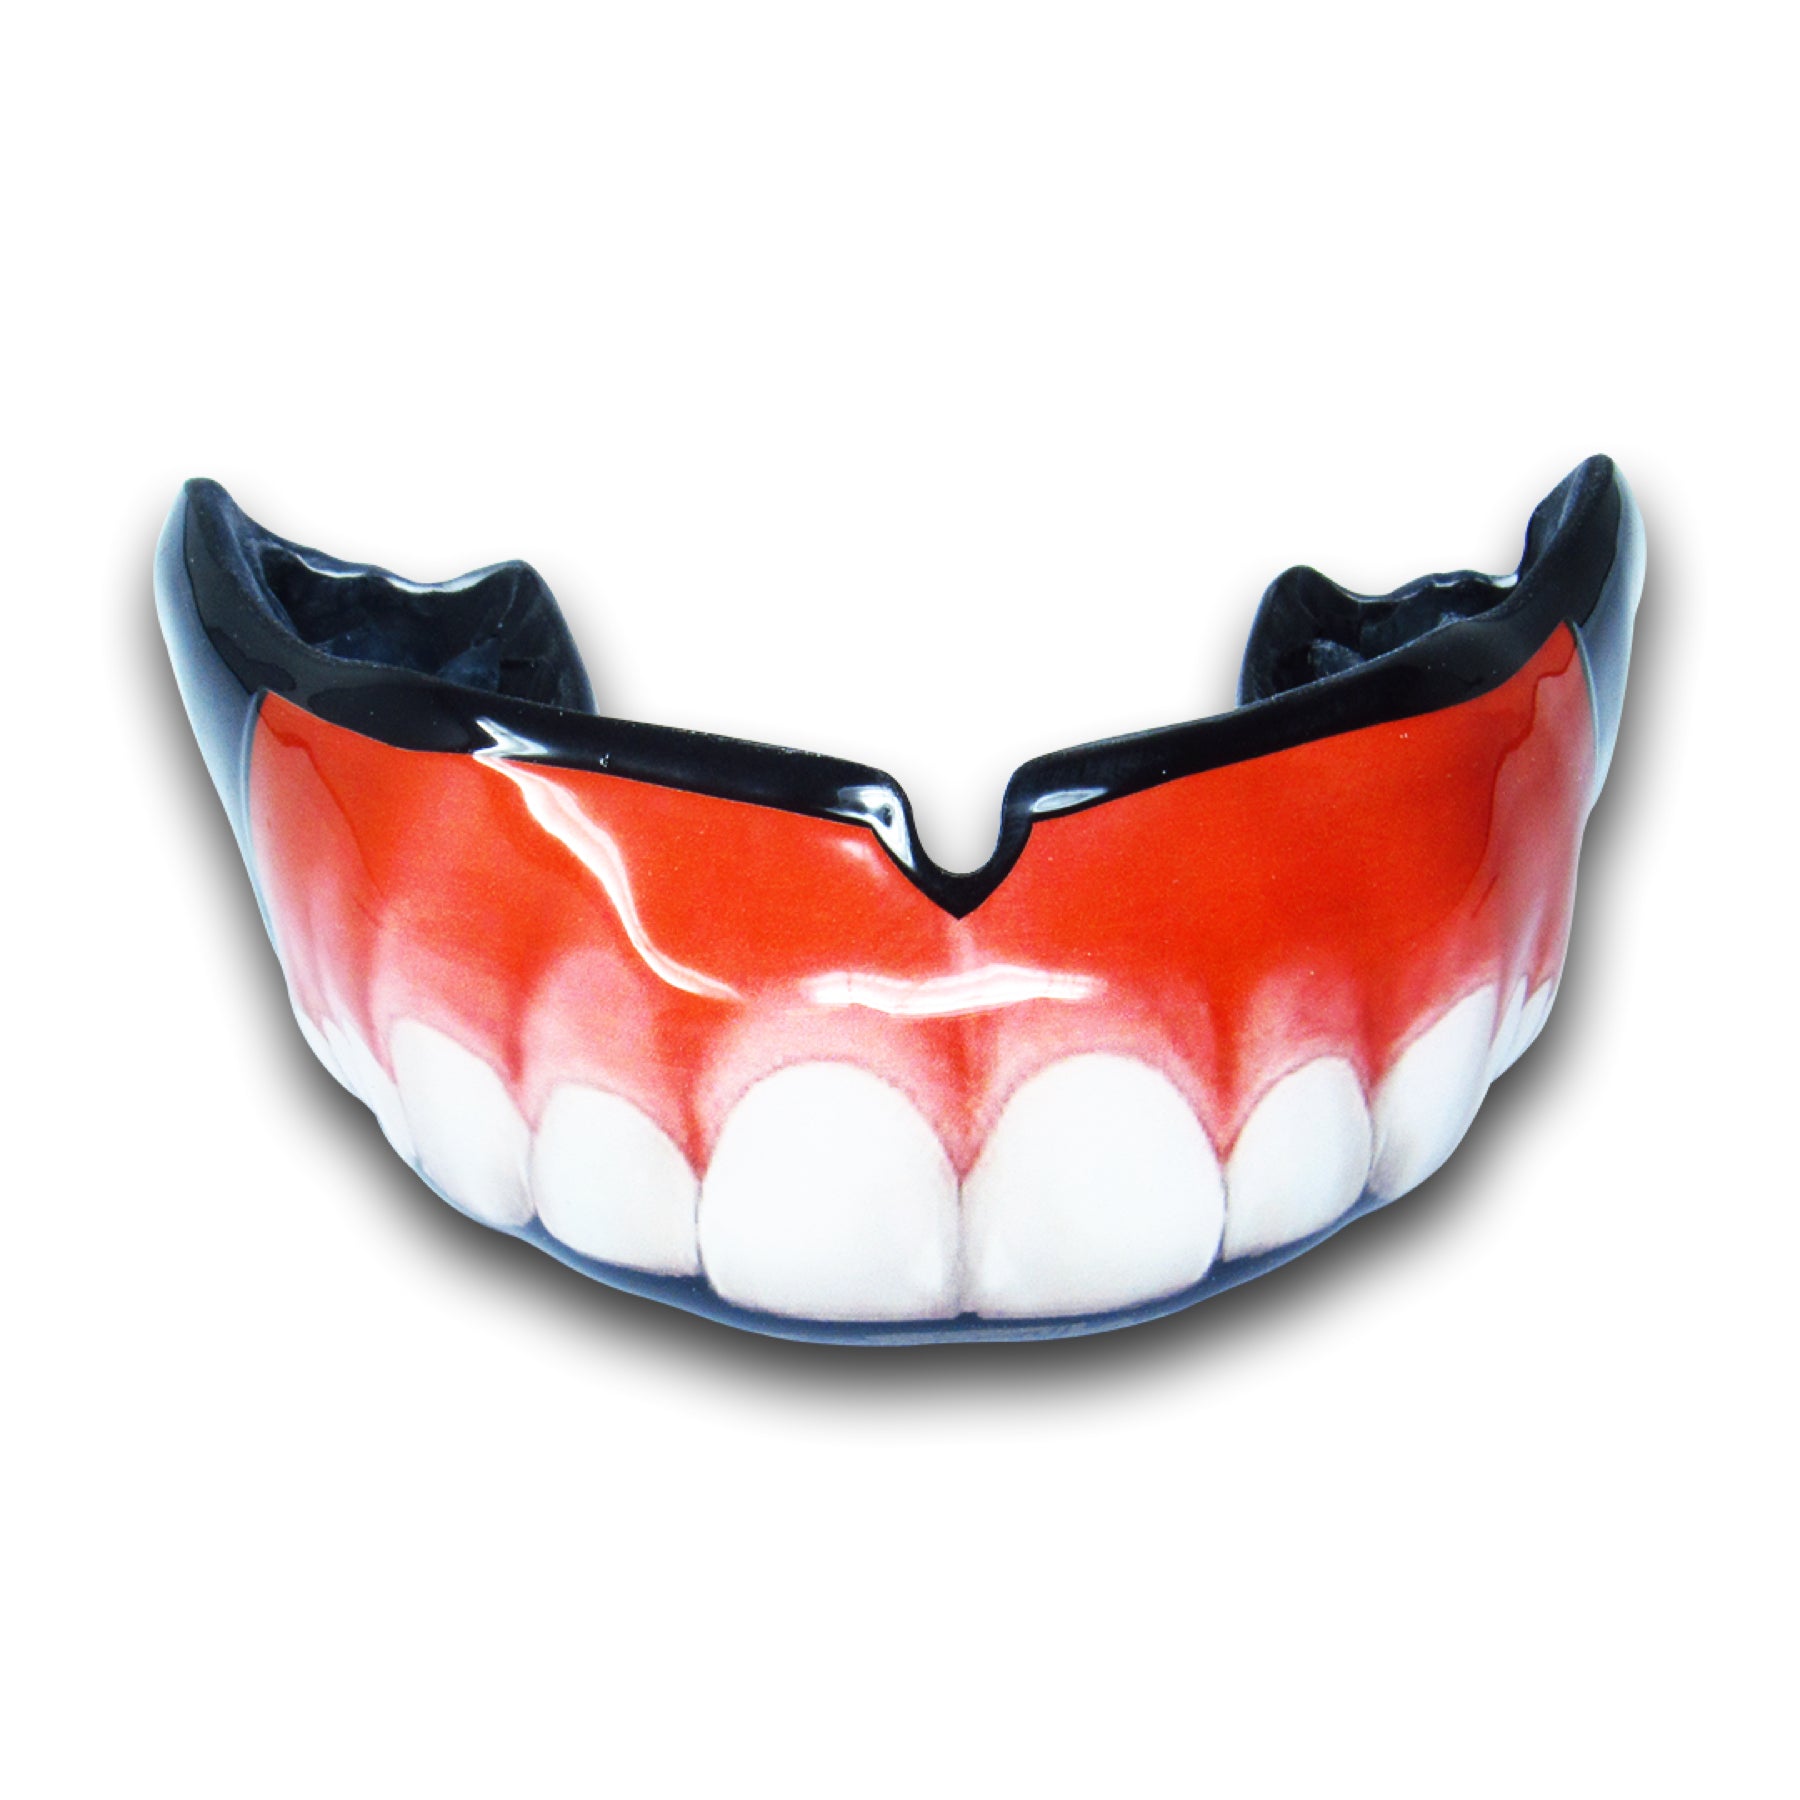 Real Teeth Mouthguards - Hilarious, Unique, and Protective